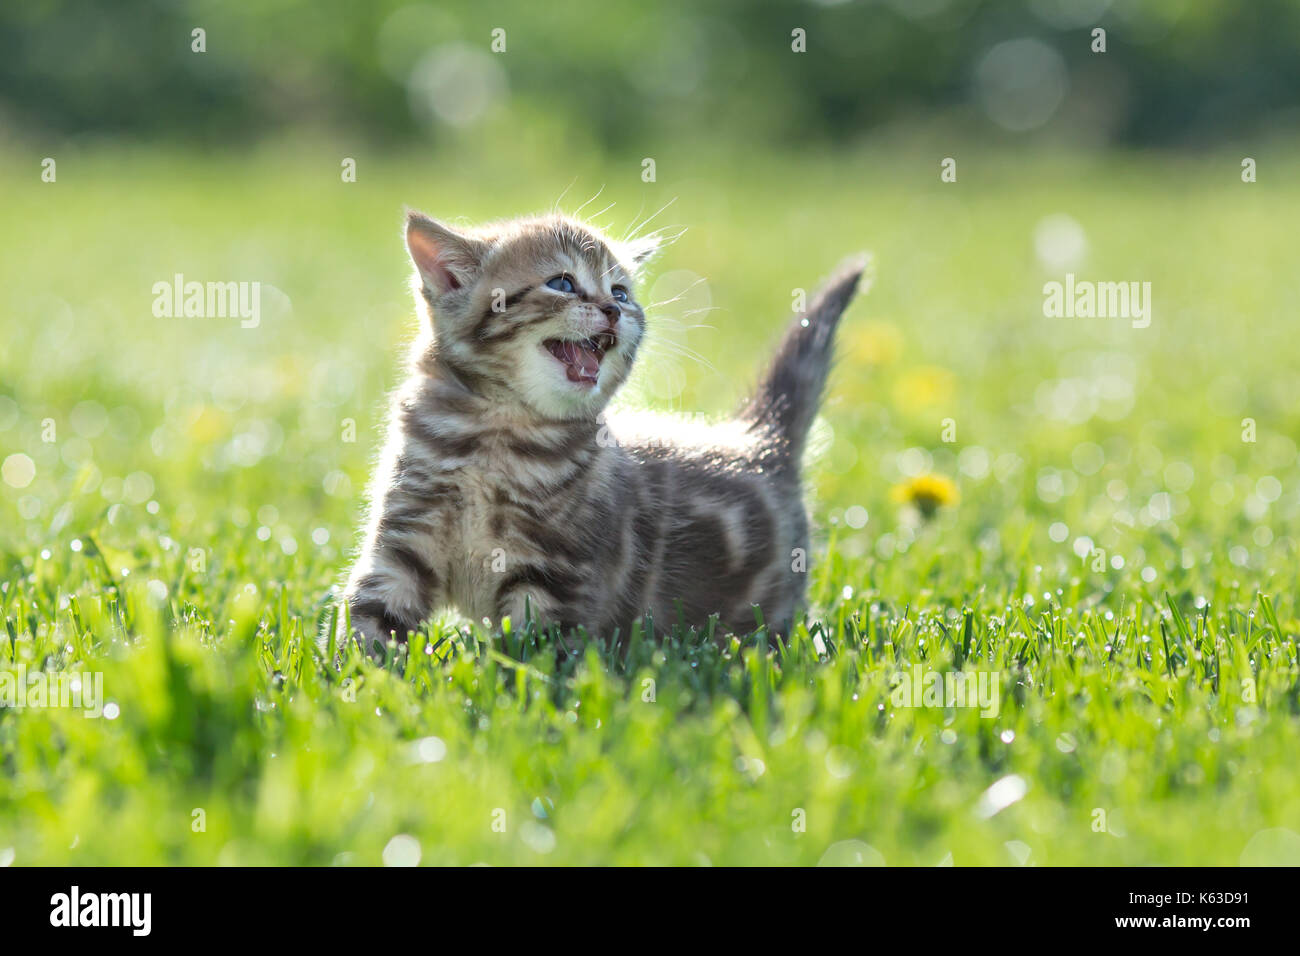 Young cute cat meowing outdoor looking up Stock Photo